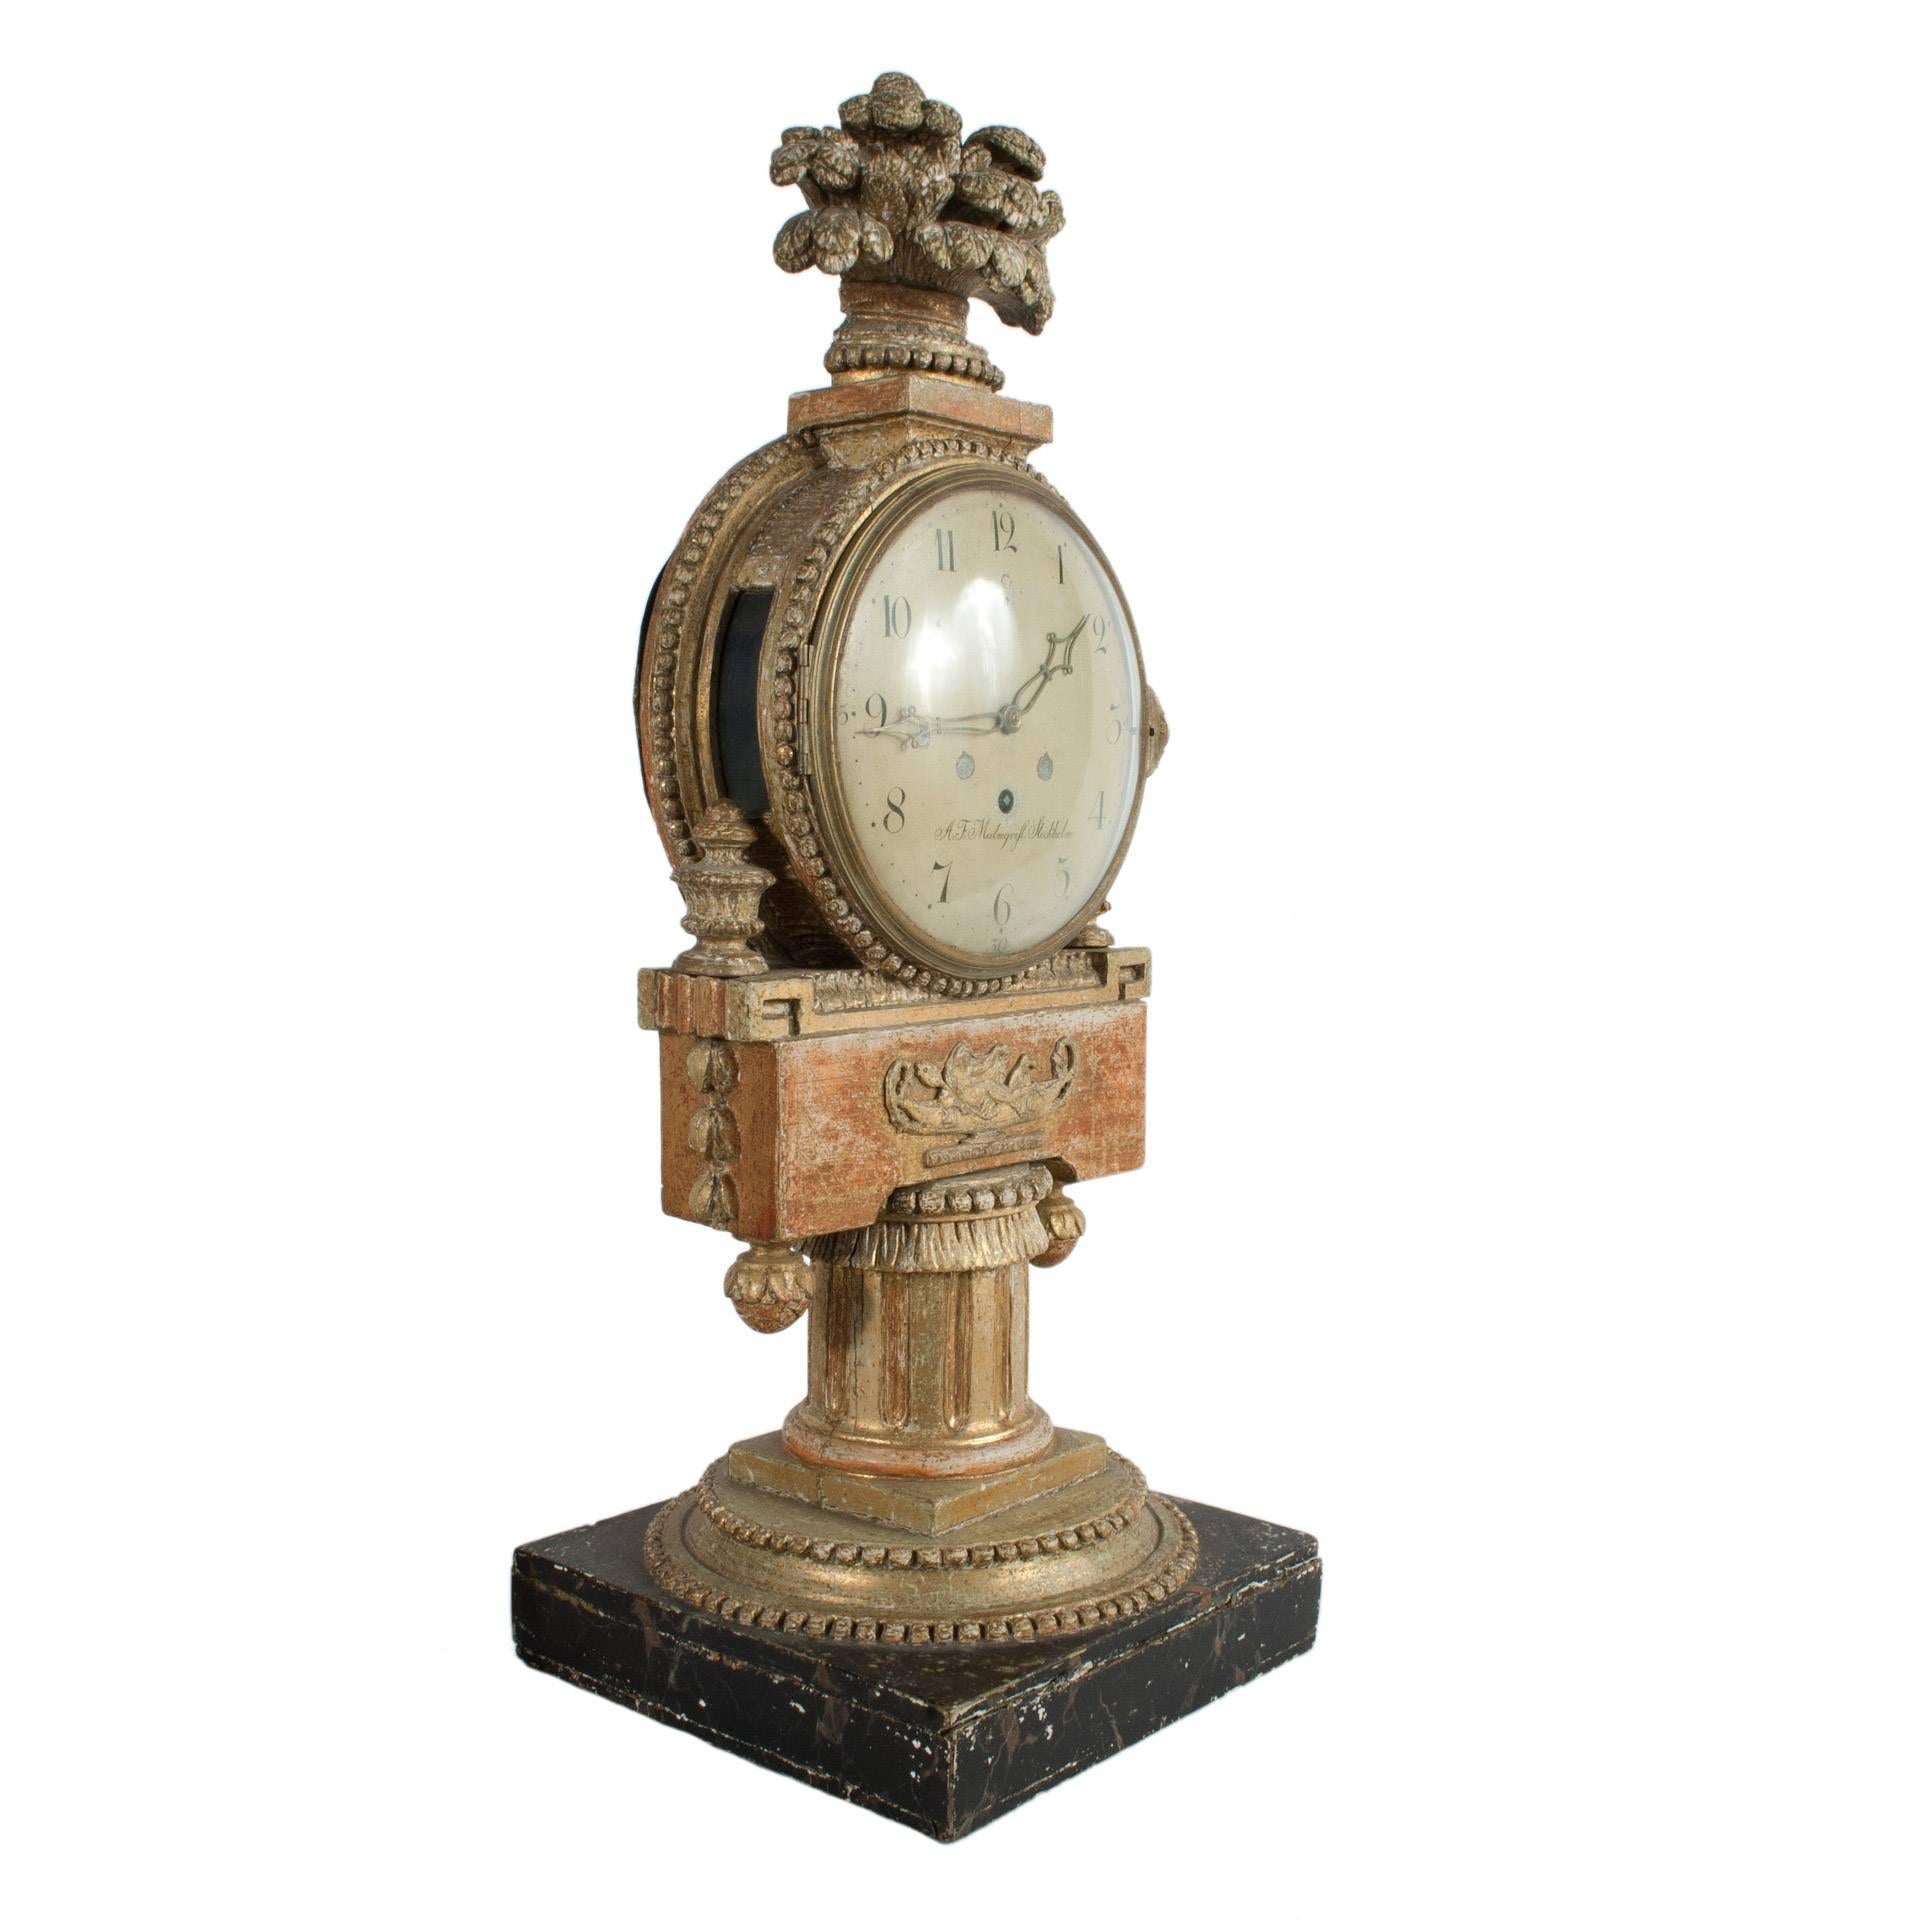 Gilded Gustavian table clock by A. F. Malmqvist.